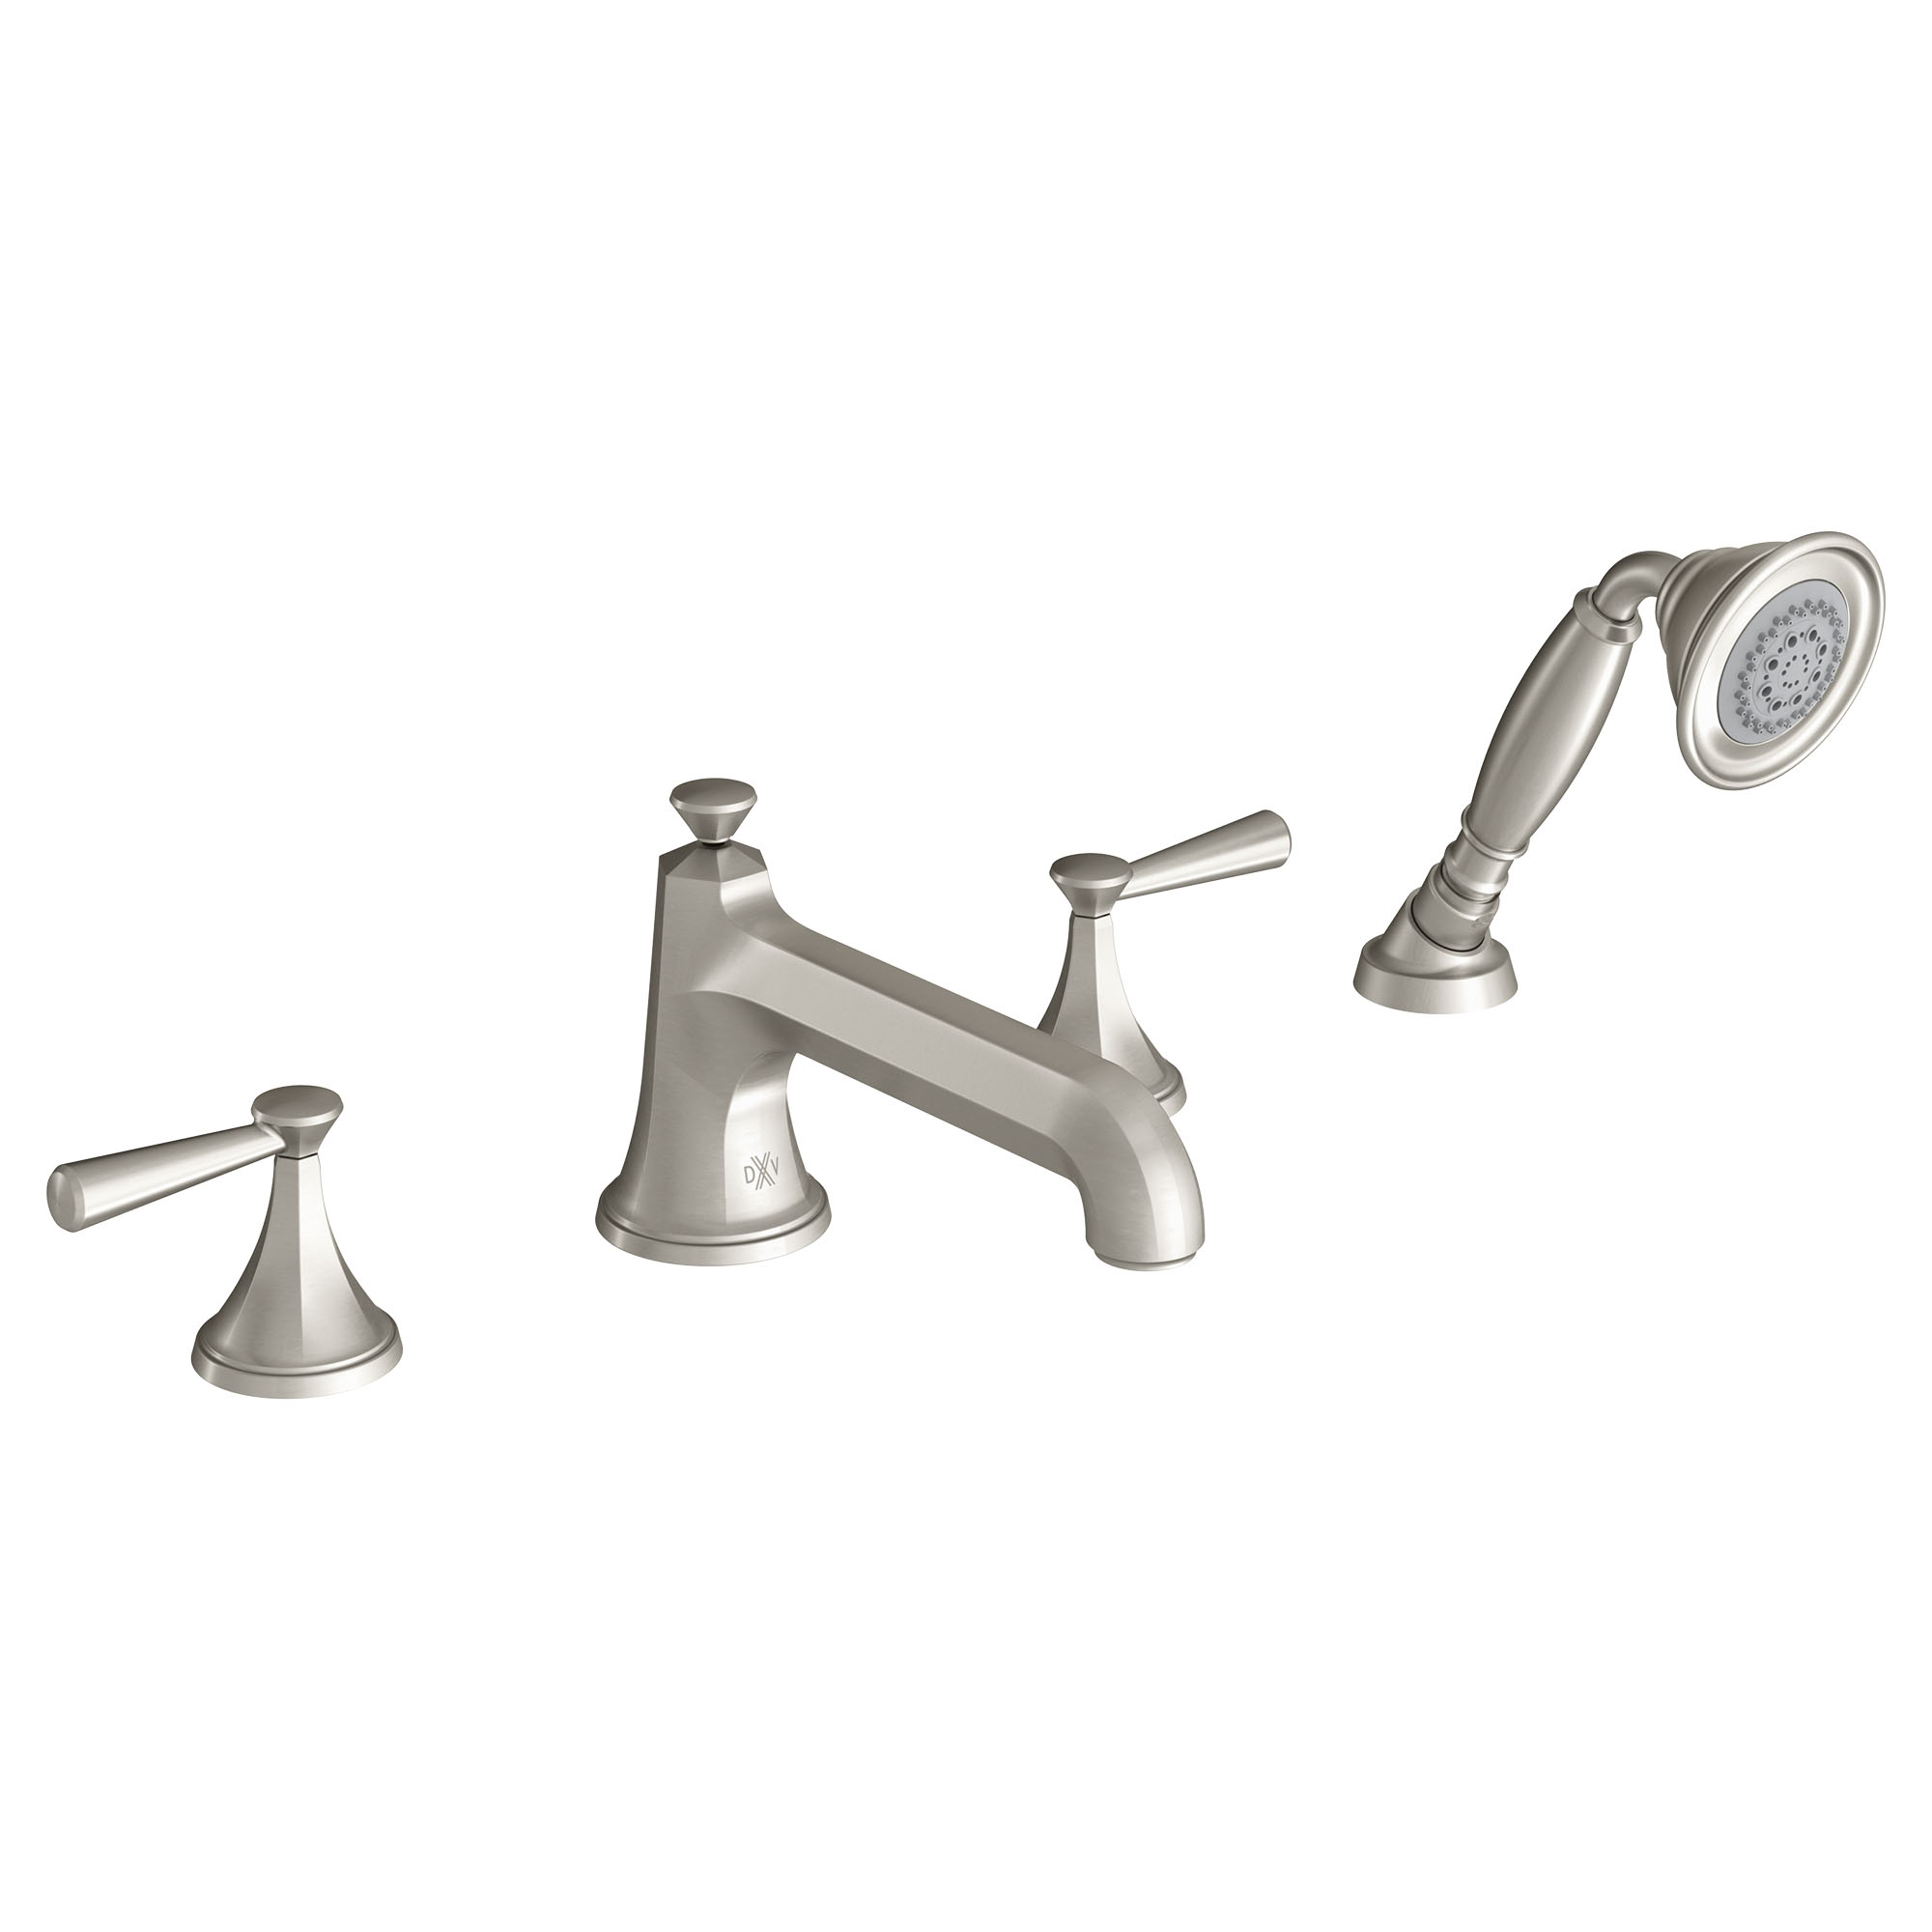 Fitzgerald 2-Handle Deck Mount Bathtub Faucet with Hand Shower and Lever Handles